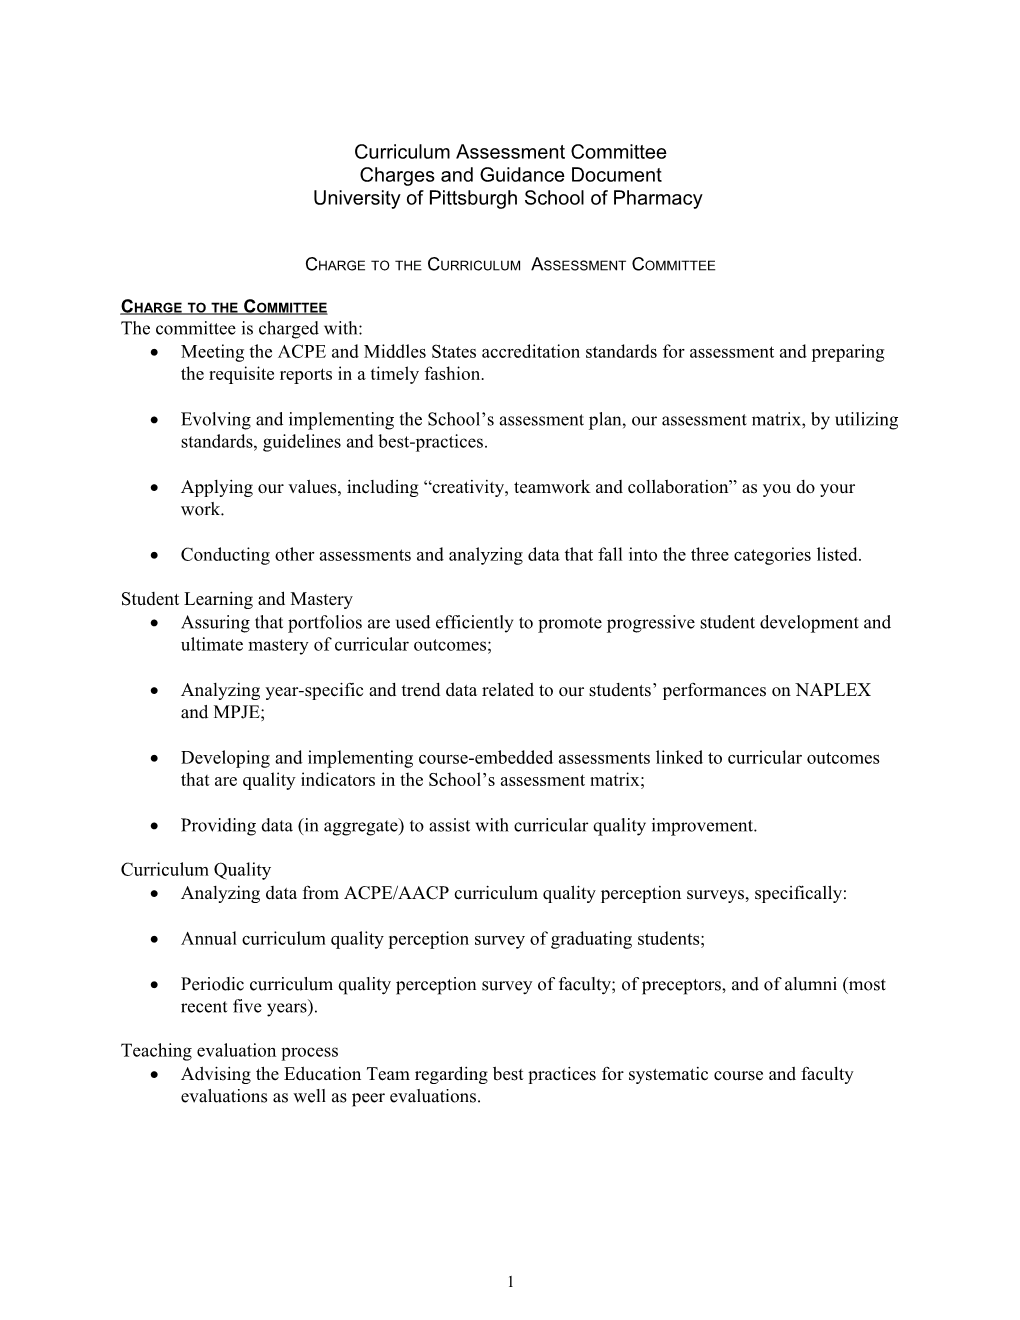 Responsibilities and Functioning of the Curriculum Committee